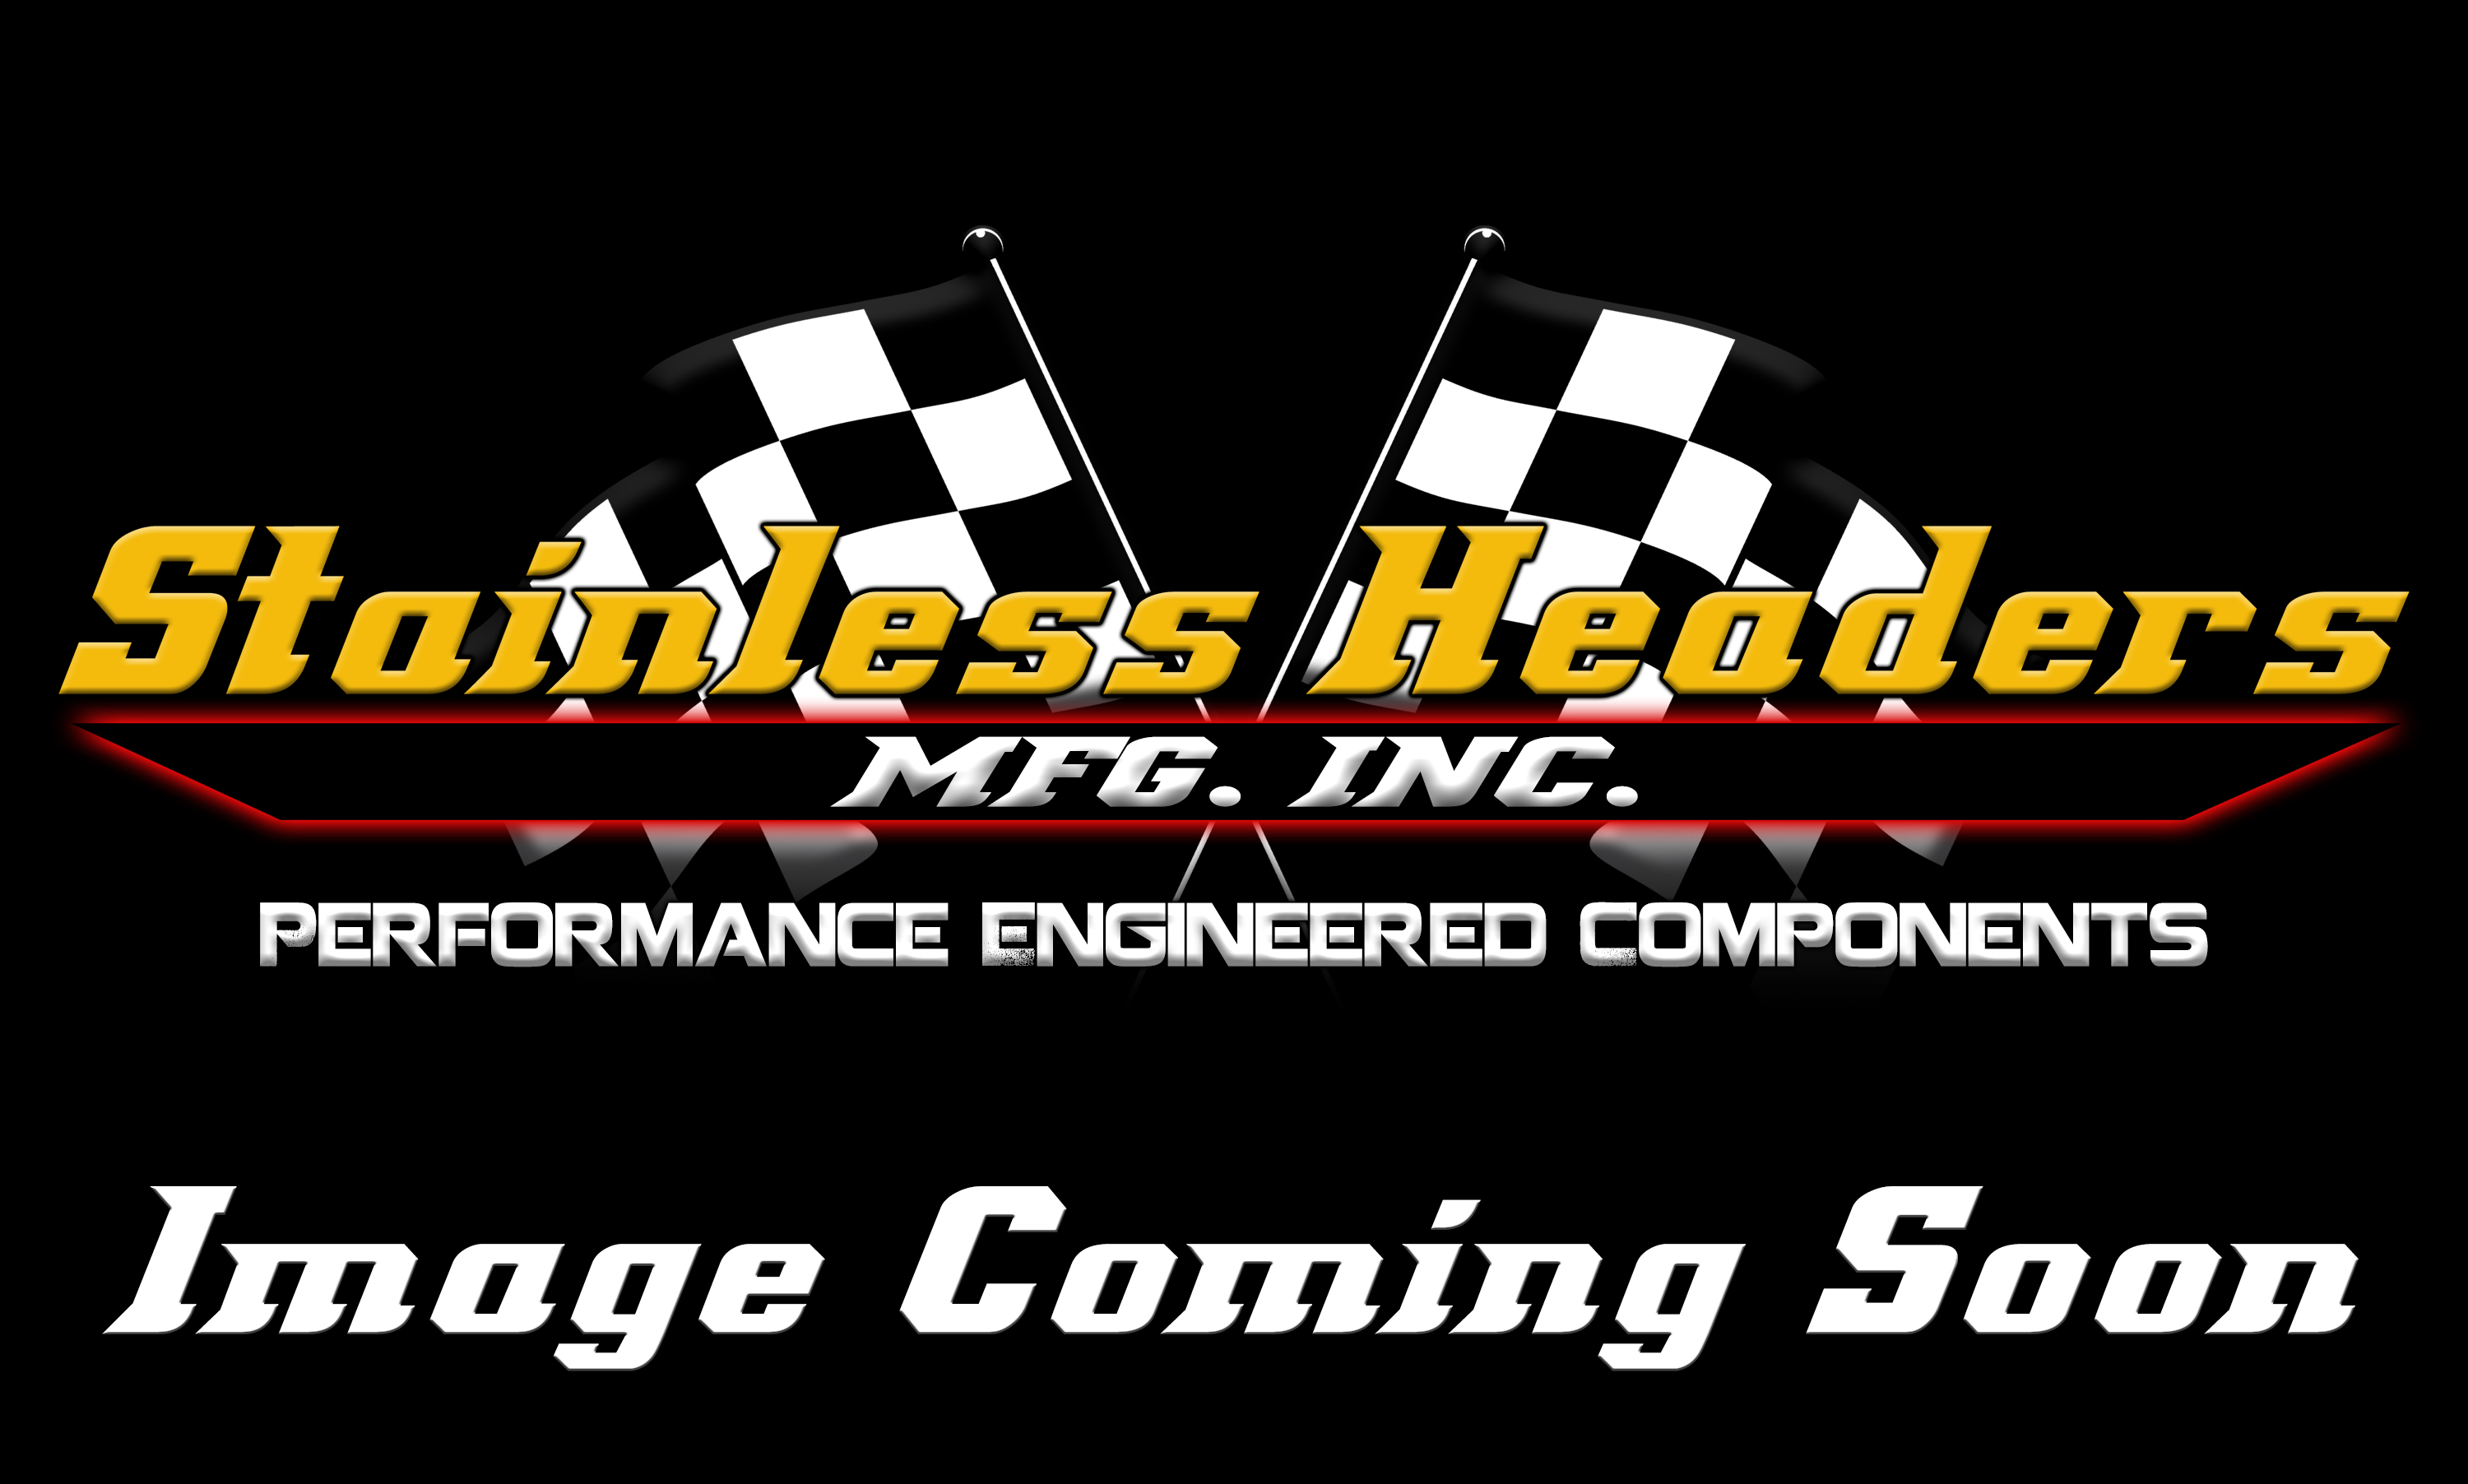 Stainless Headers - 1 3/4" Primary 2 into 1 Performance Merge Collector-16ga 321ss